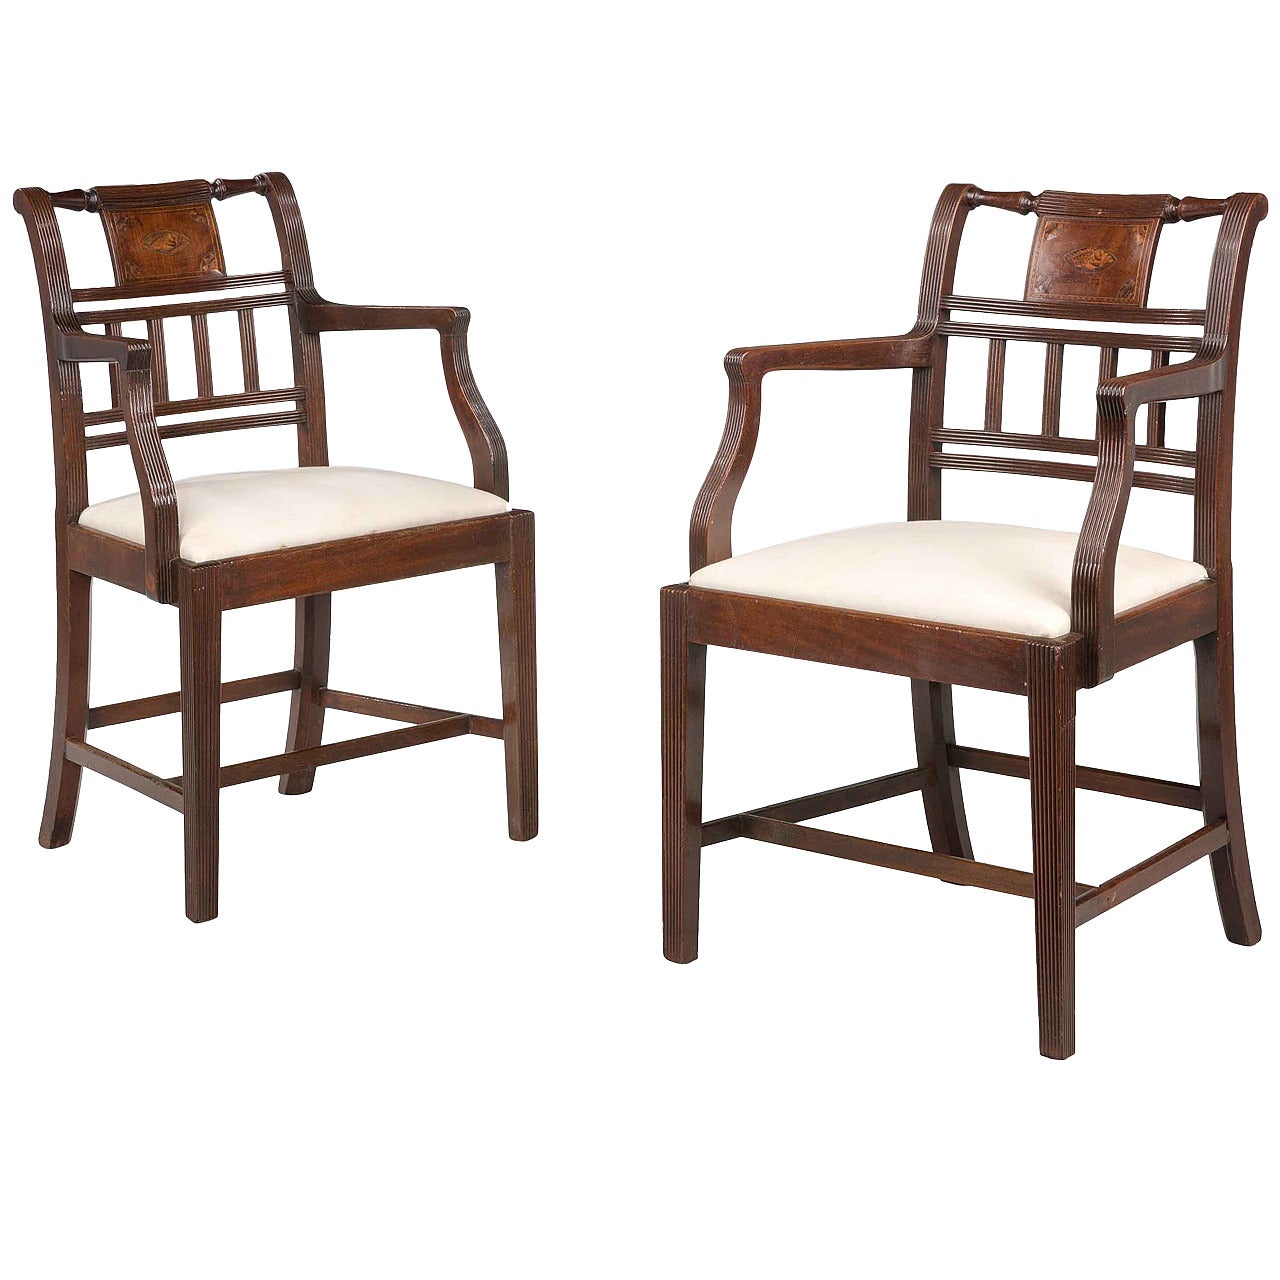 Pair of 18th Century Sheraton Period Elbow Chairs